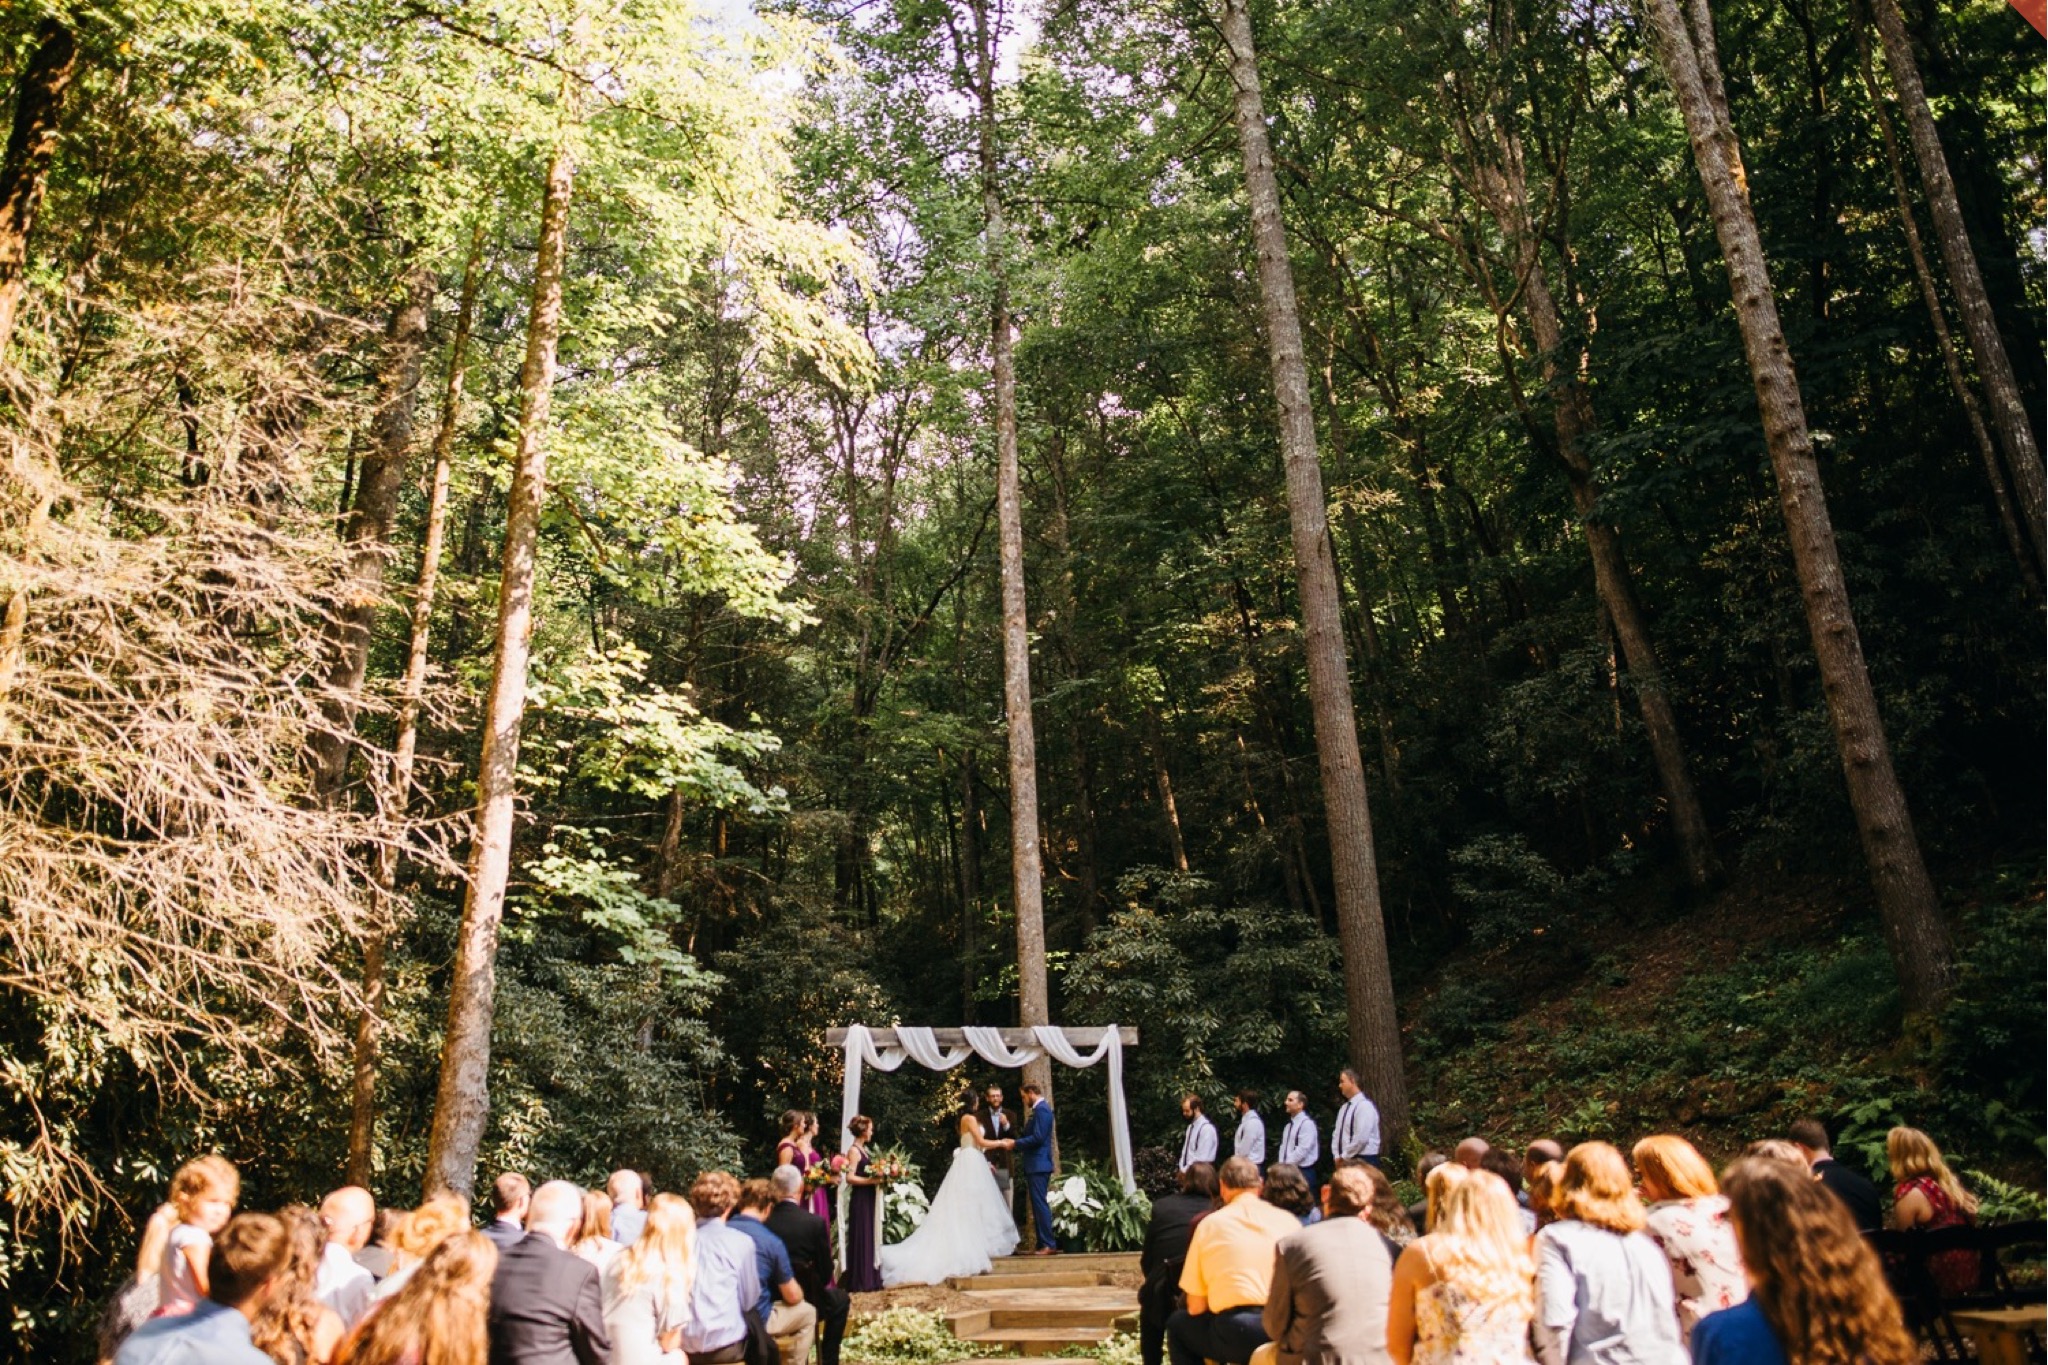 The bride and groom stand hand-in-hand at the altar in the forest.